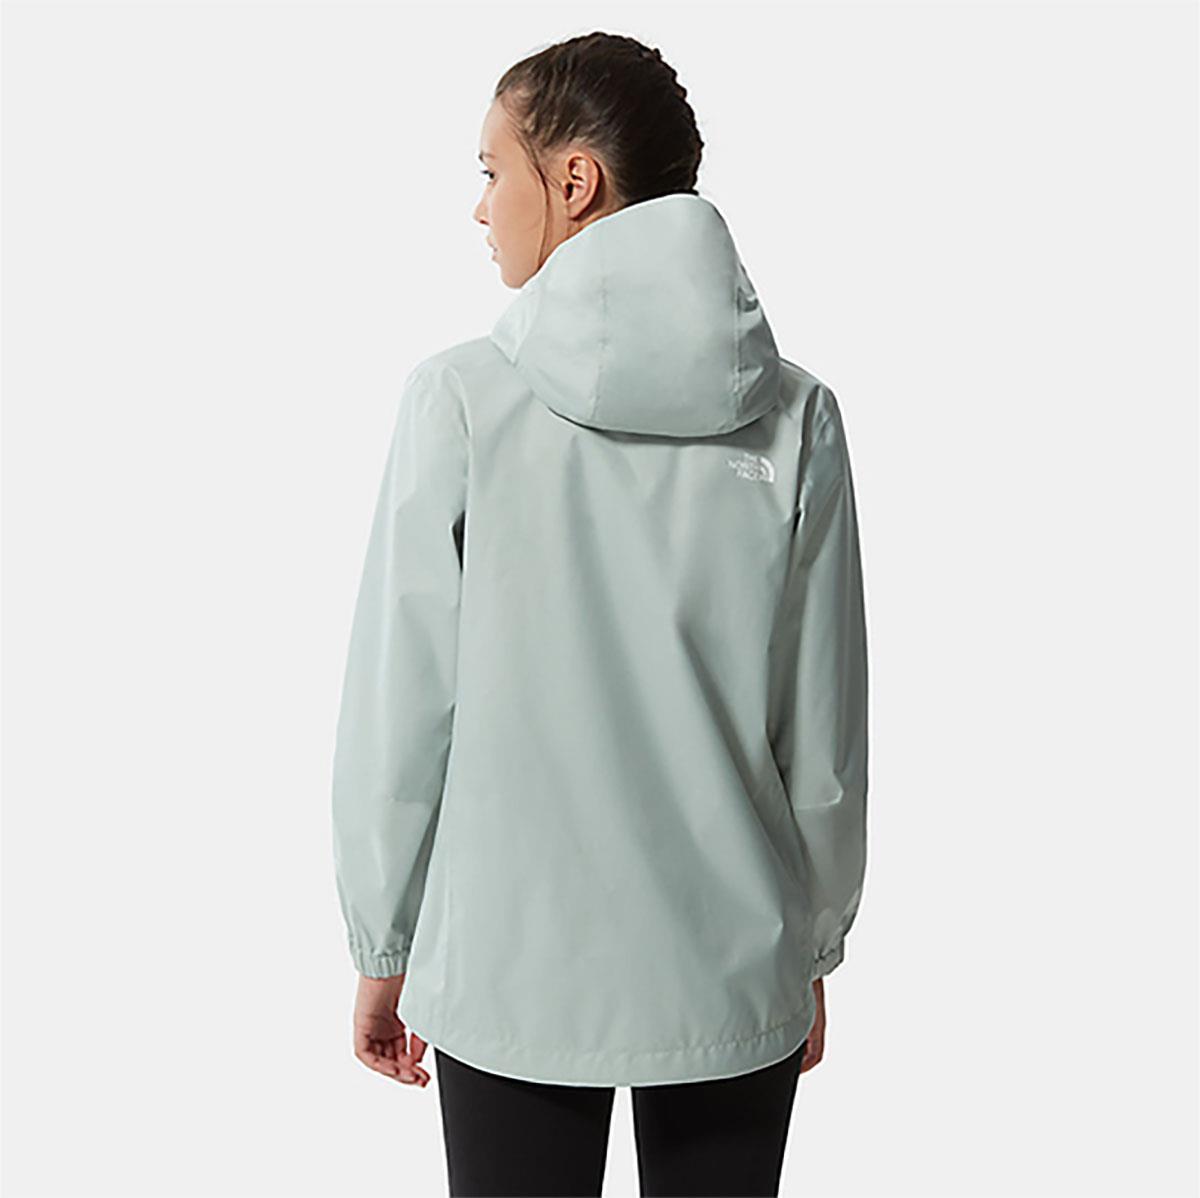  The Northface Bayan W QUEST JACKET - EU NF00A8BAJUP1